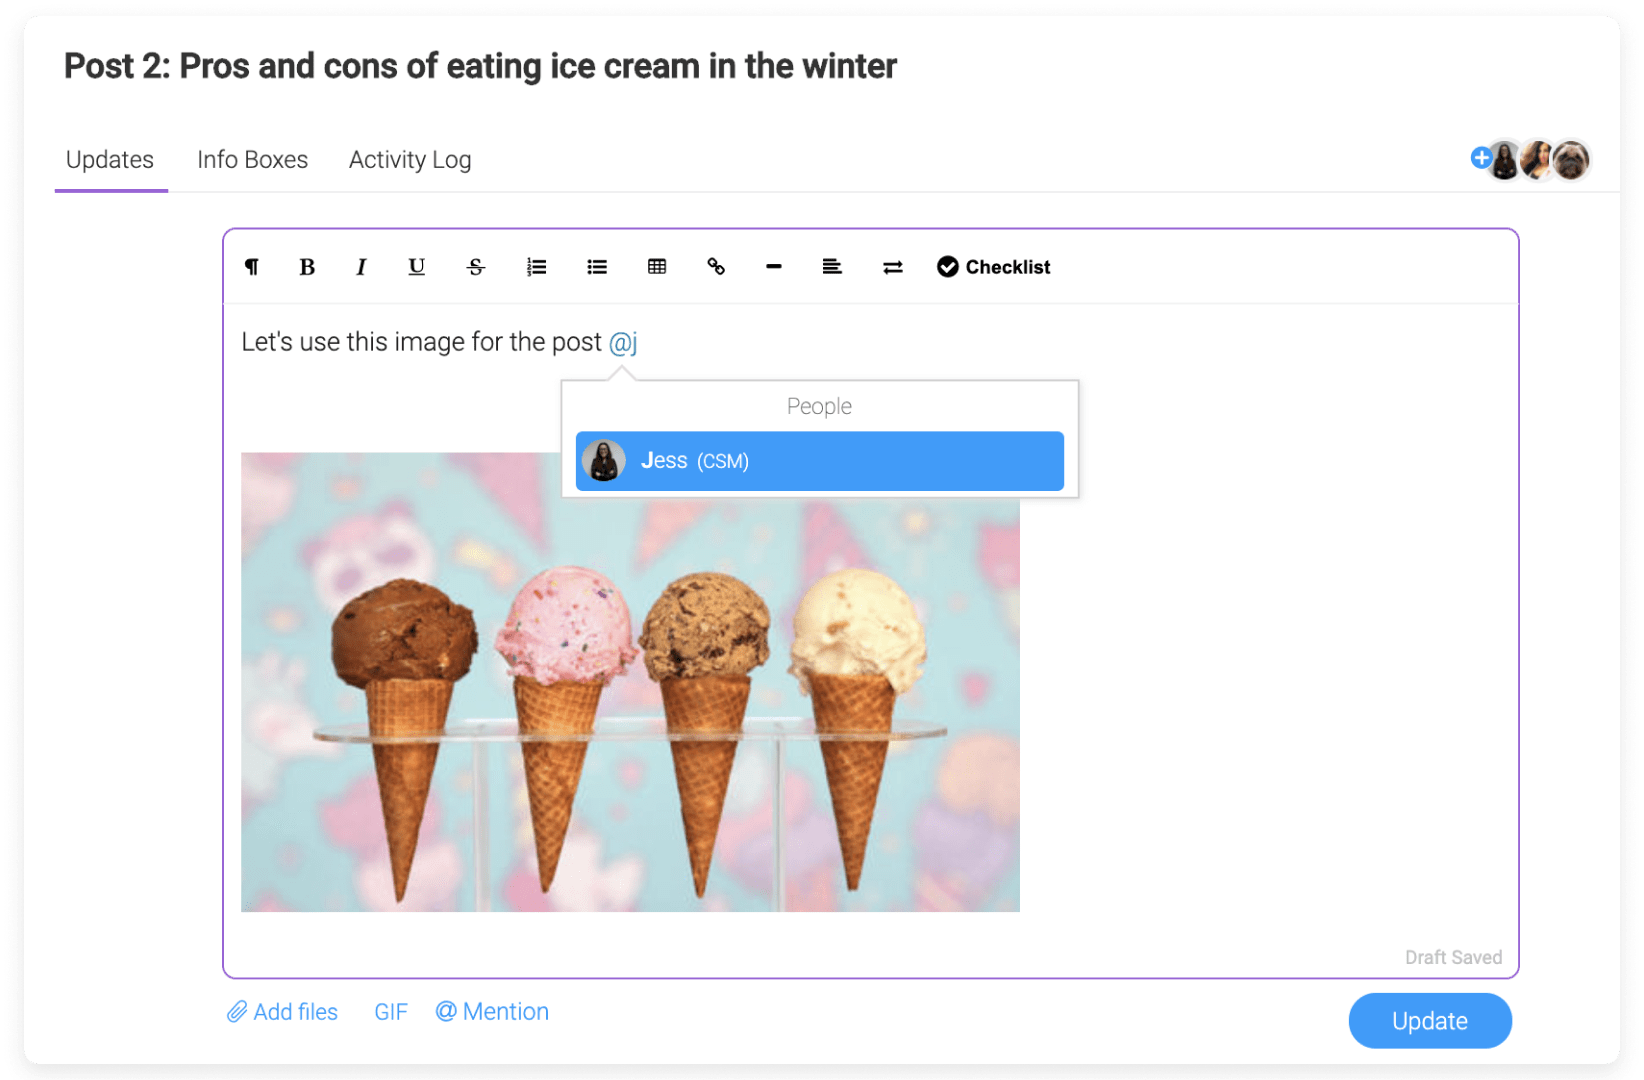 monday.com allows teams to collaborate by adding comments to tasks and tagging team members